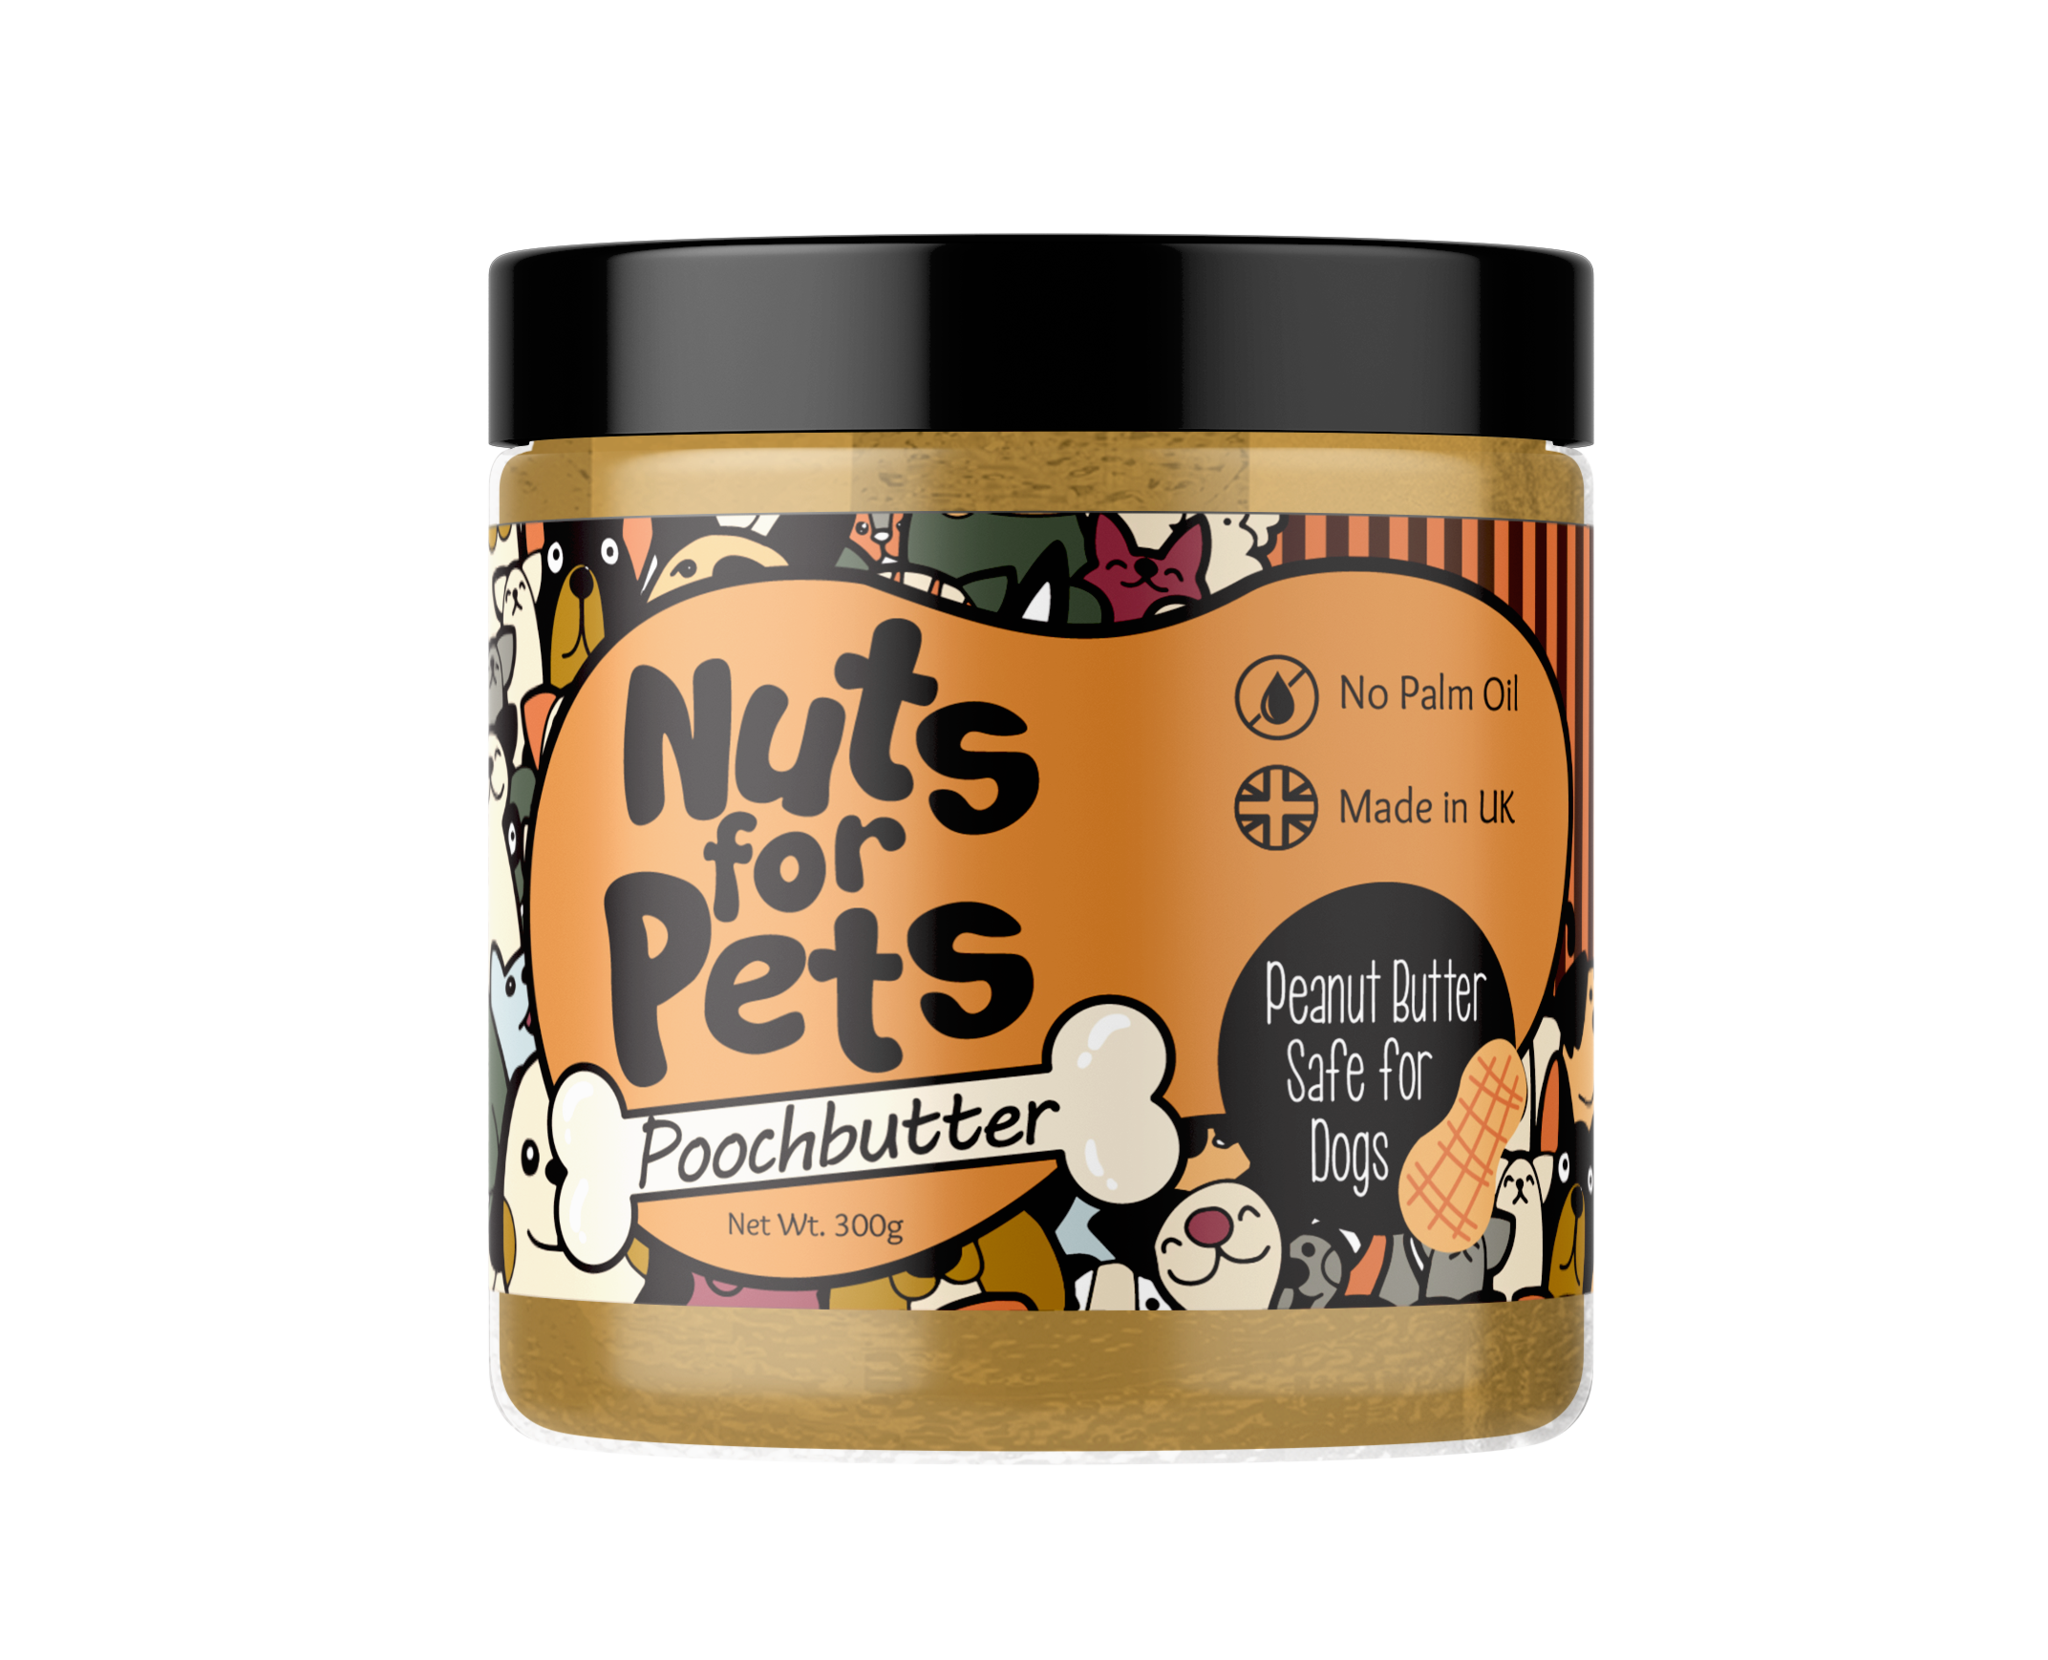 NUTS FOR PETS PEANUT BUTTER